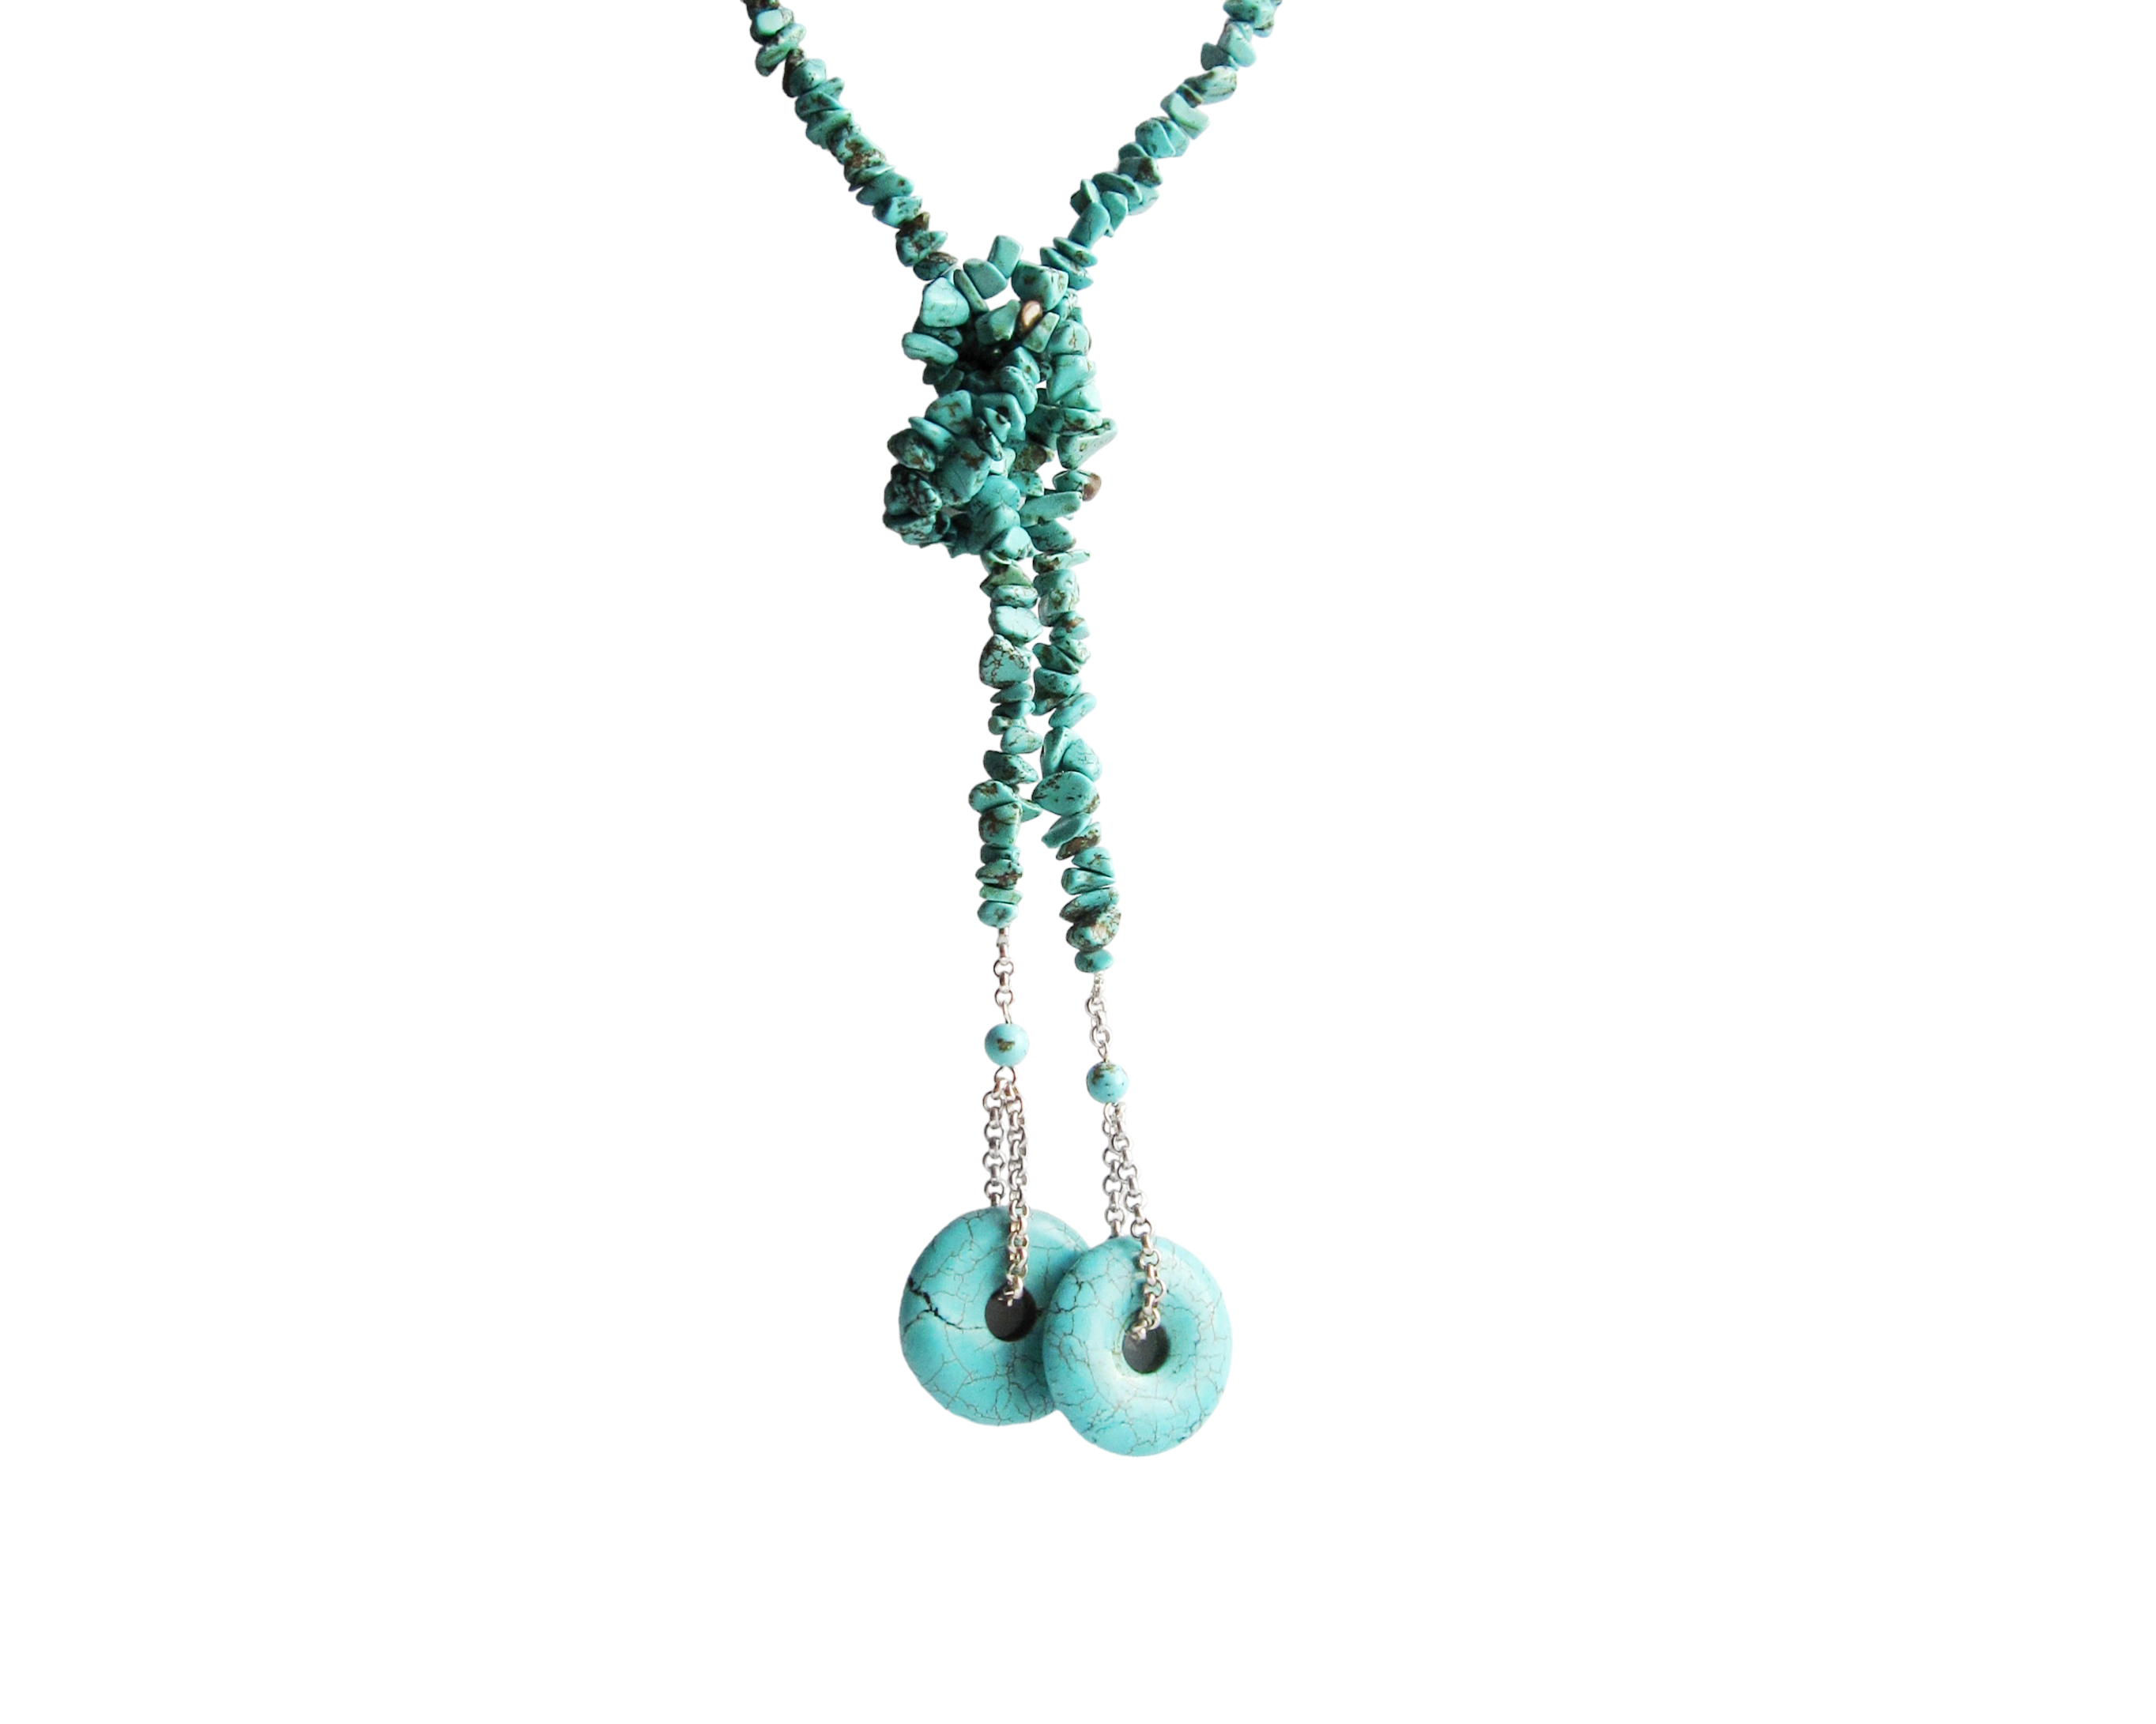 Beaded Lariat Necklace | Northern Reflections